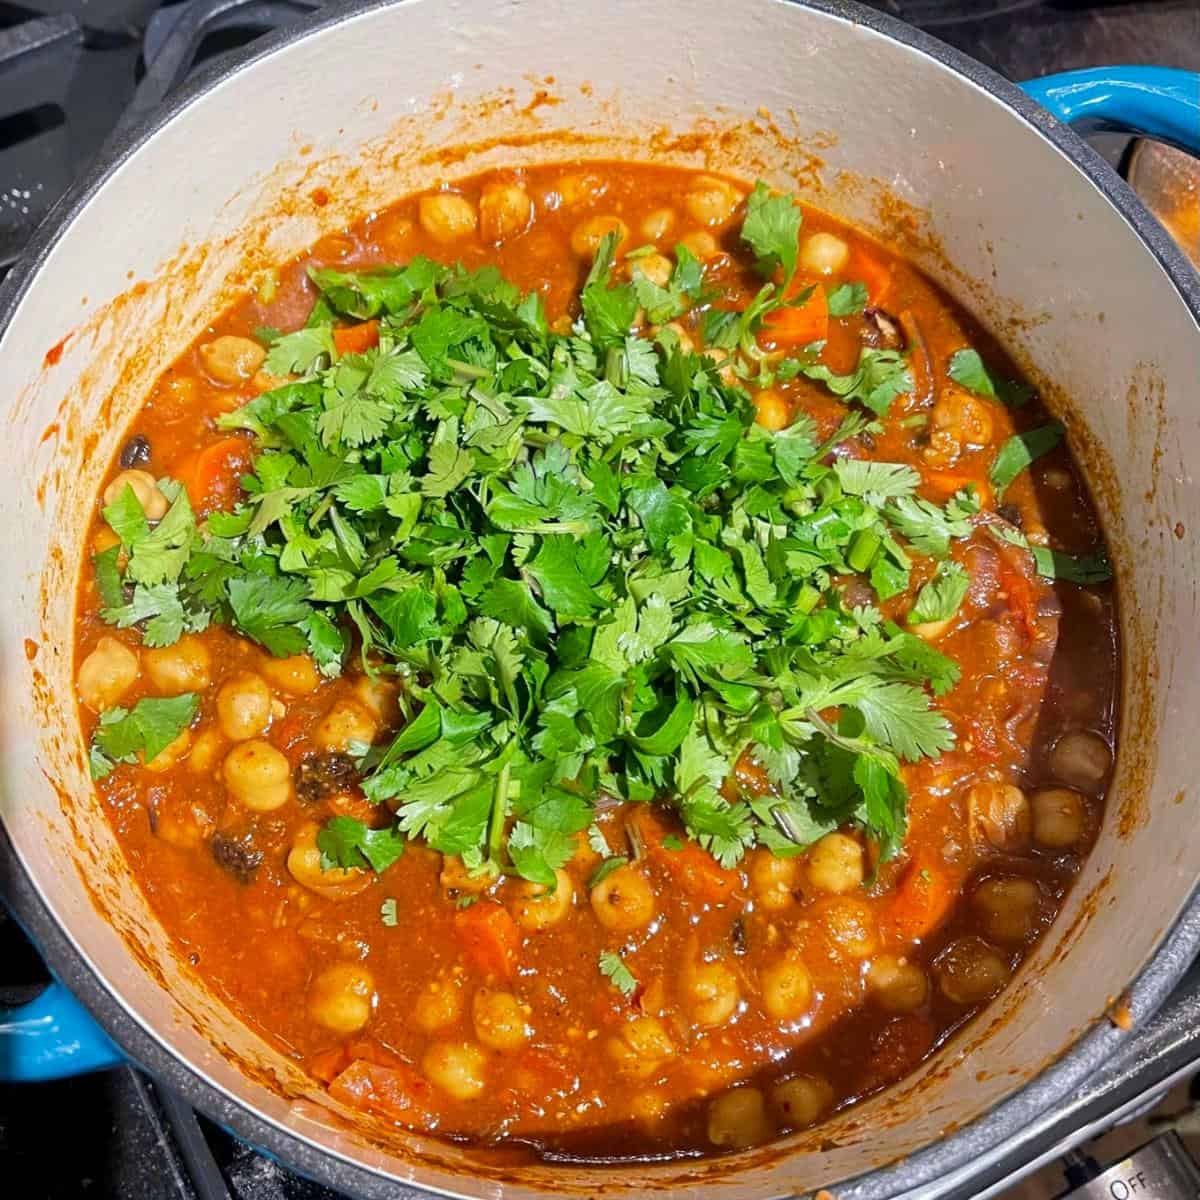 Chickpea tagine with cilantro added